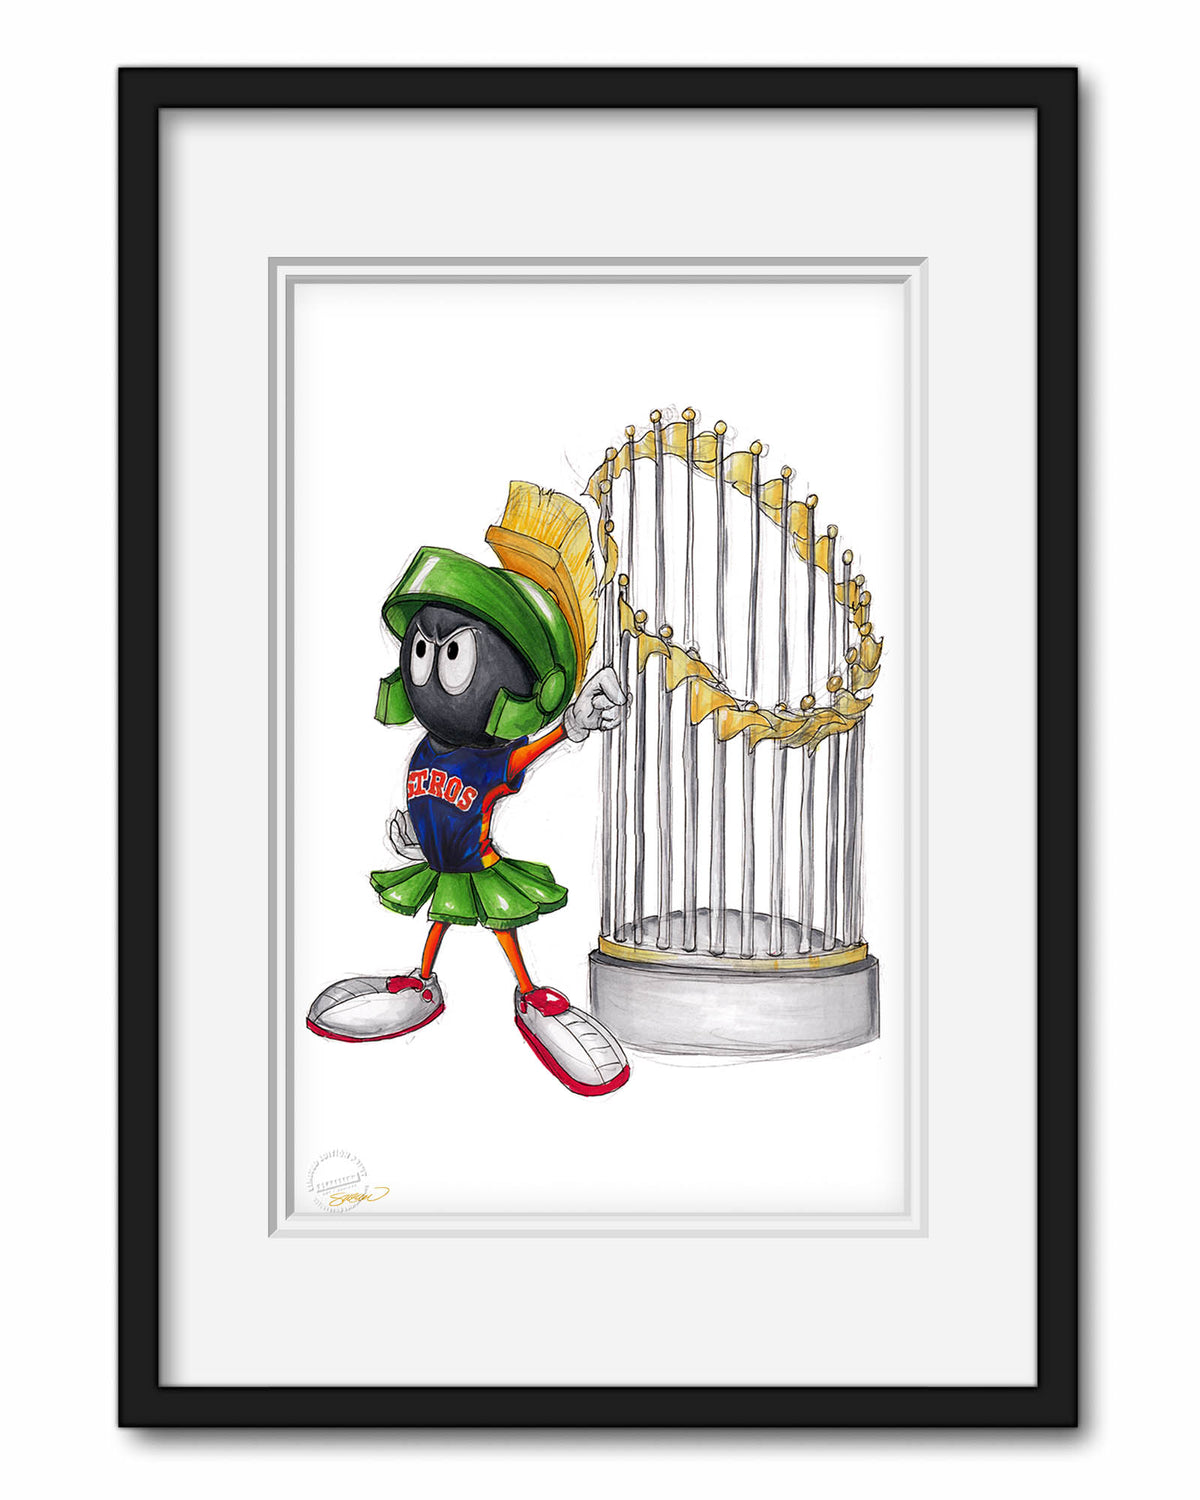 2022 Houston Astros again World Series Framed Front Page 